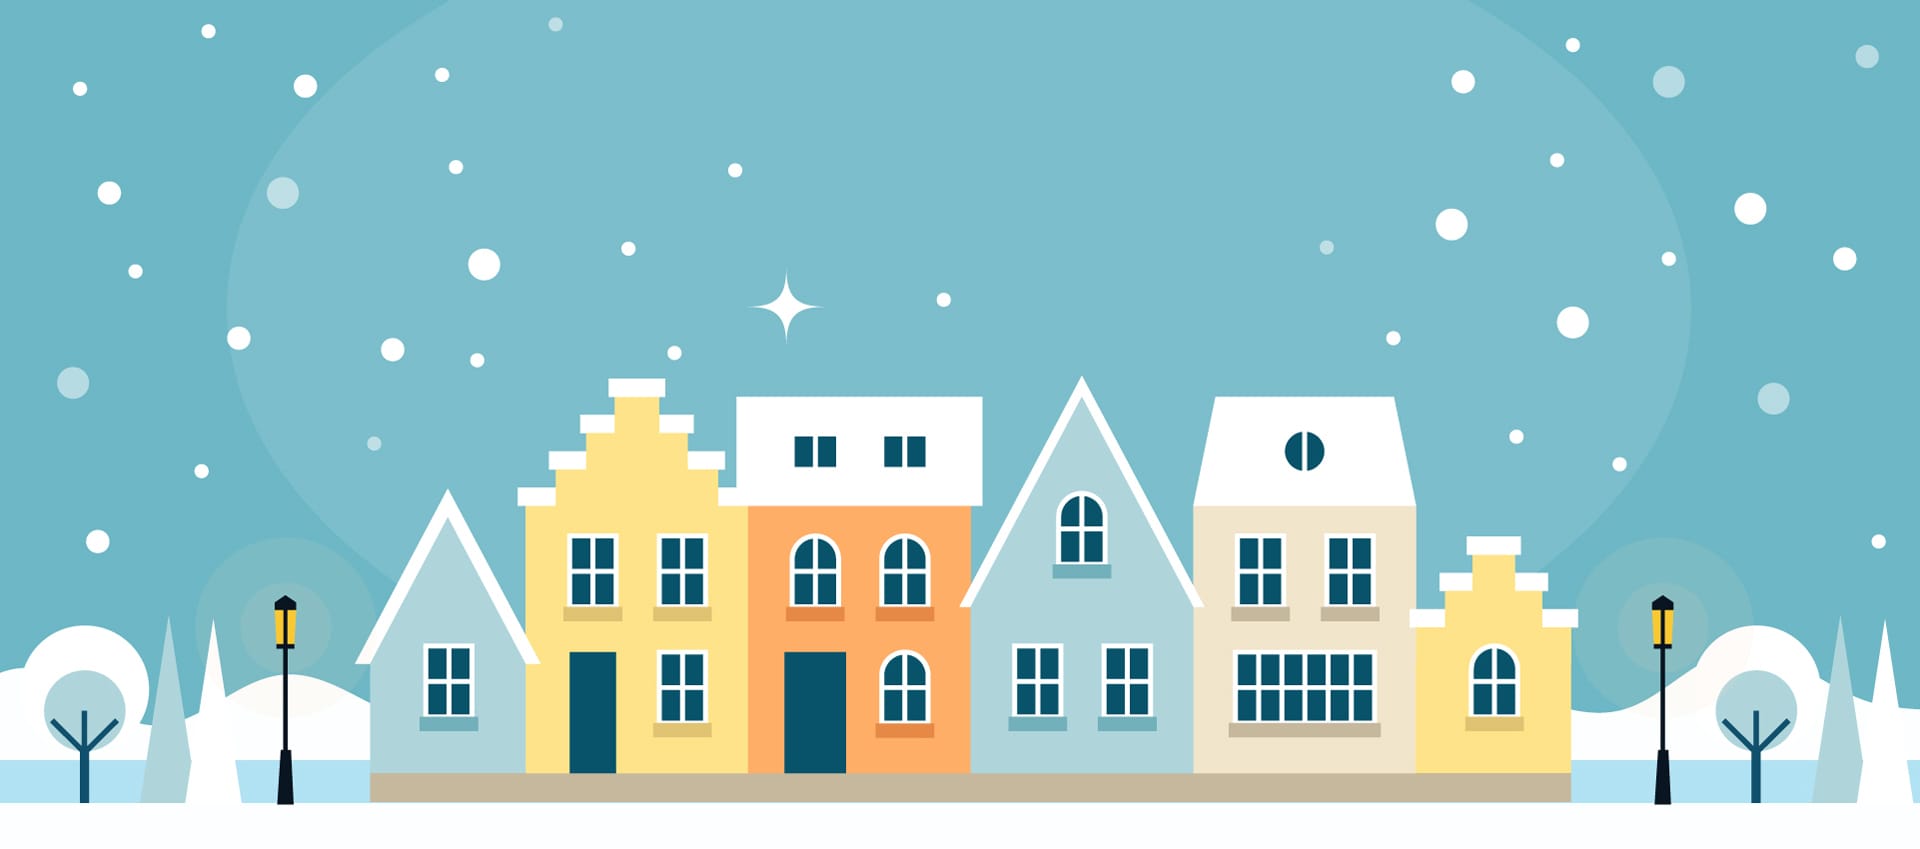 Banners flat style with christmas town image